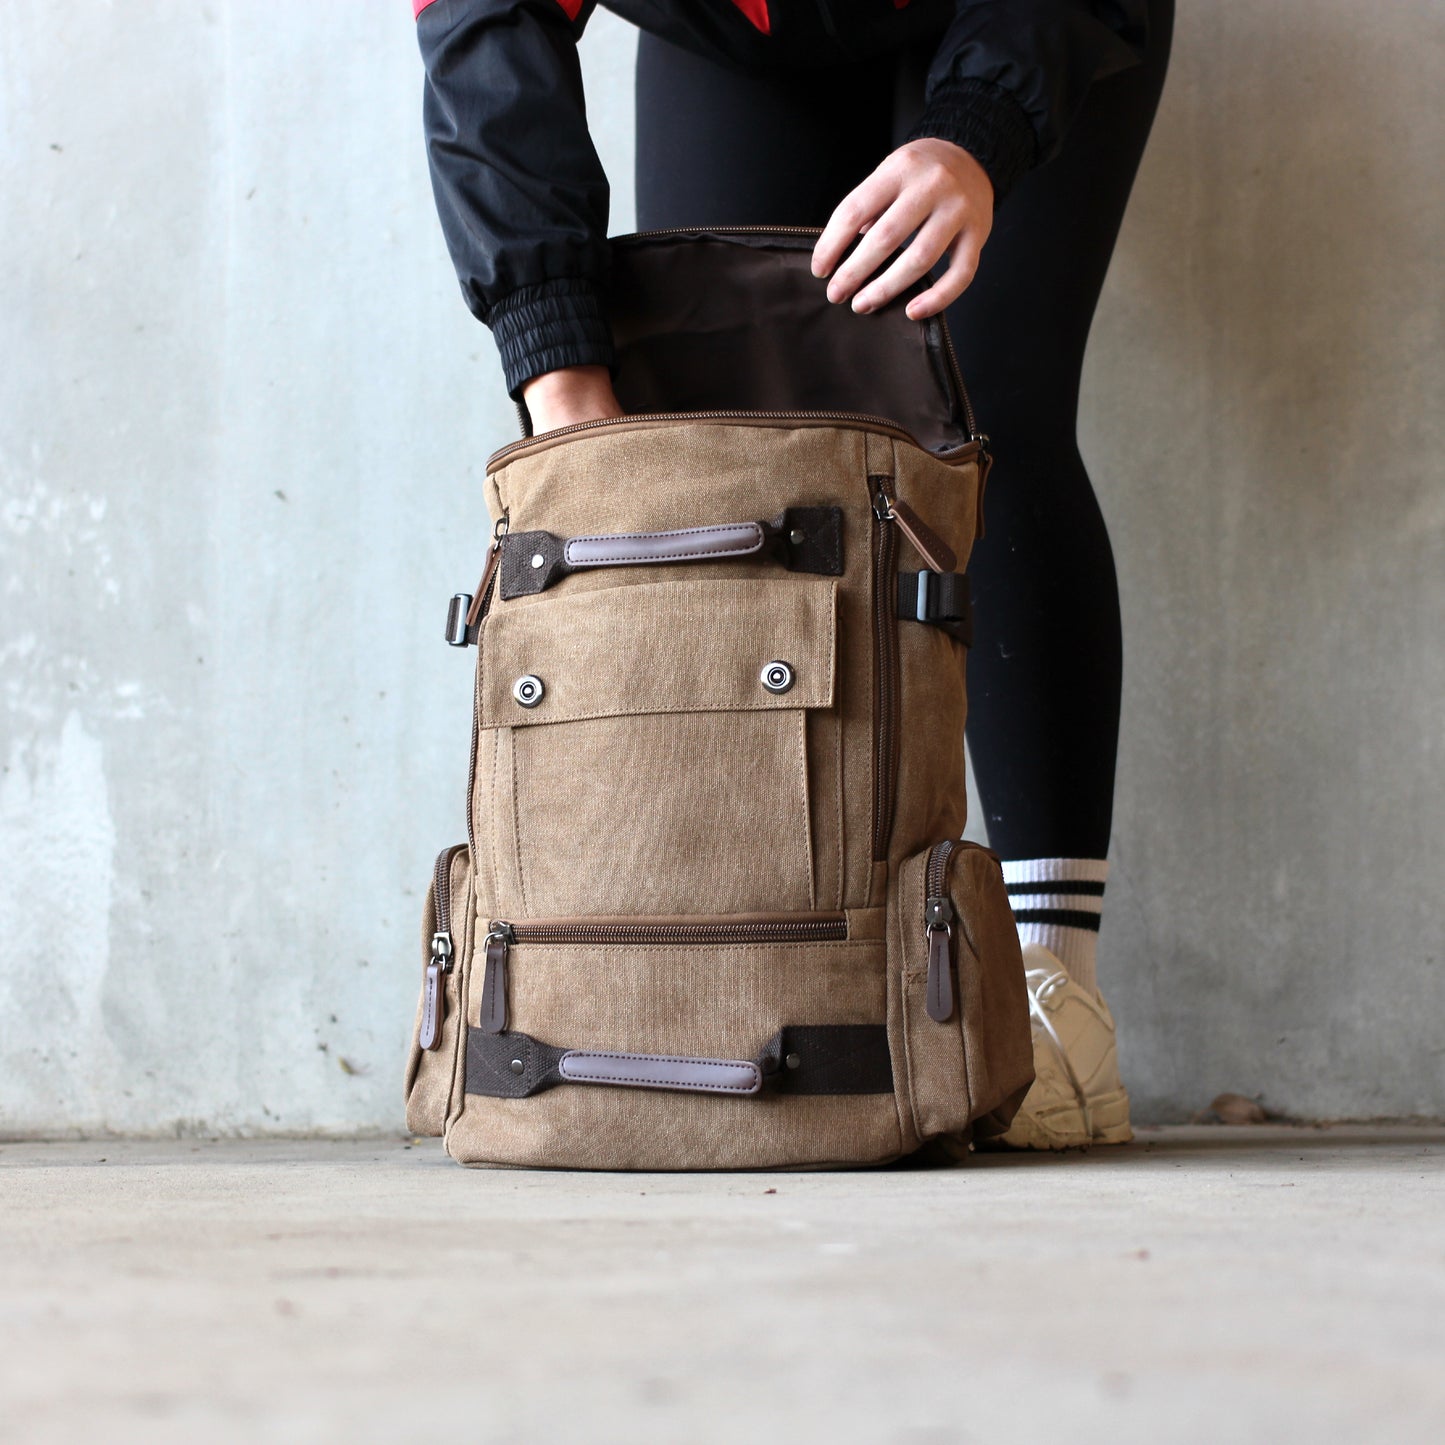 Highlands Backpack - Cocoa Brown